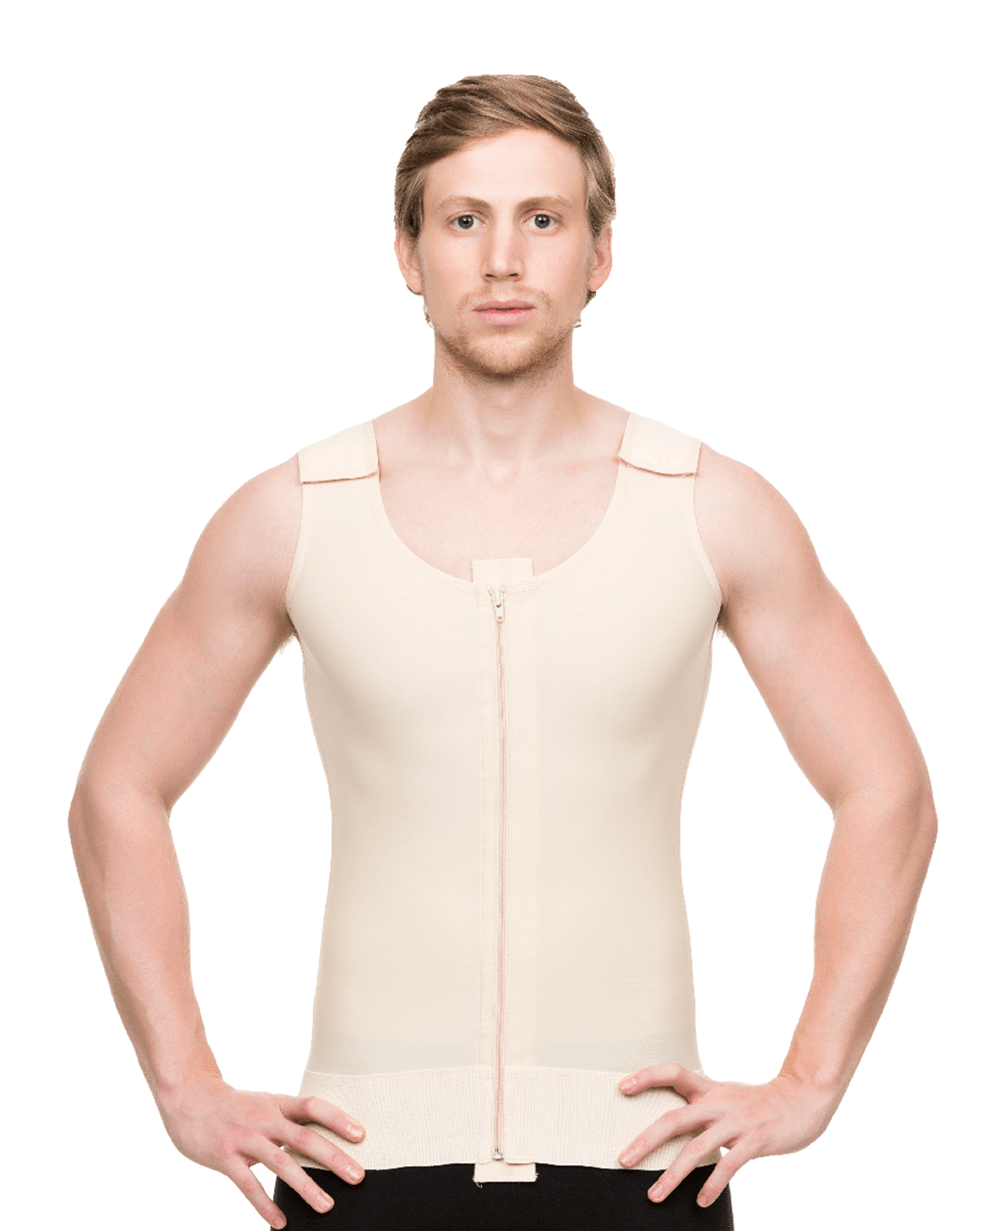 Isavela Male Compression Garments - JD Healthcare Group Pty Ltd